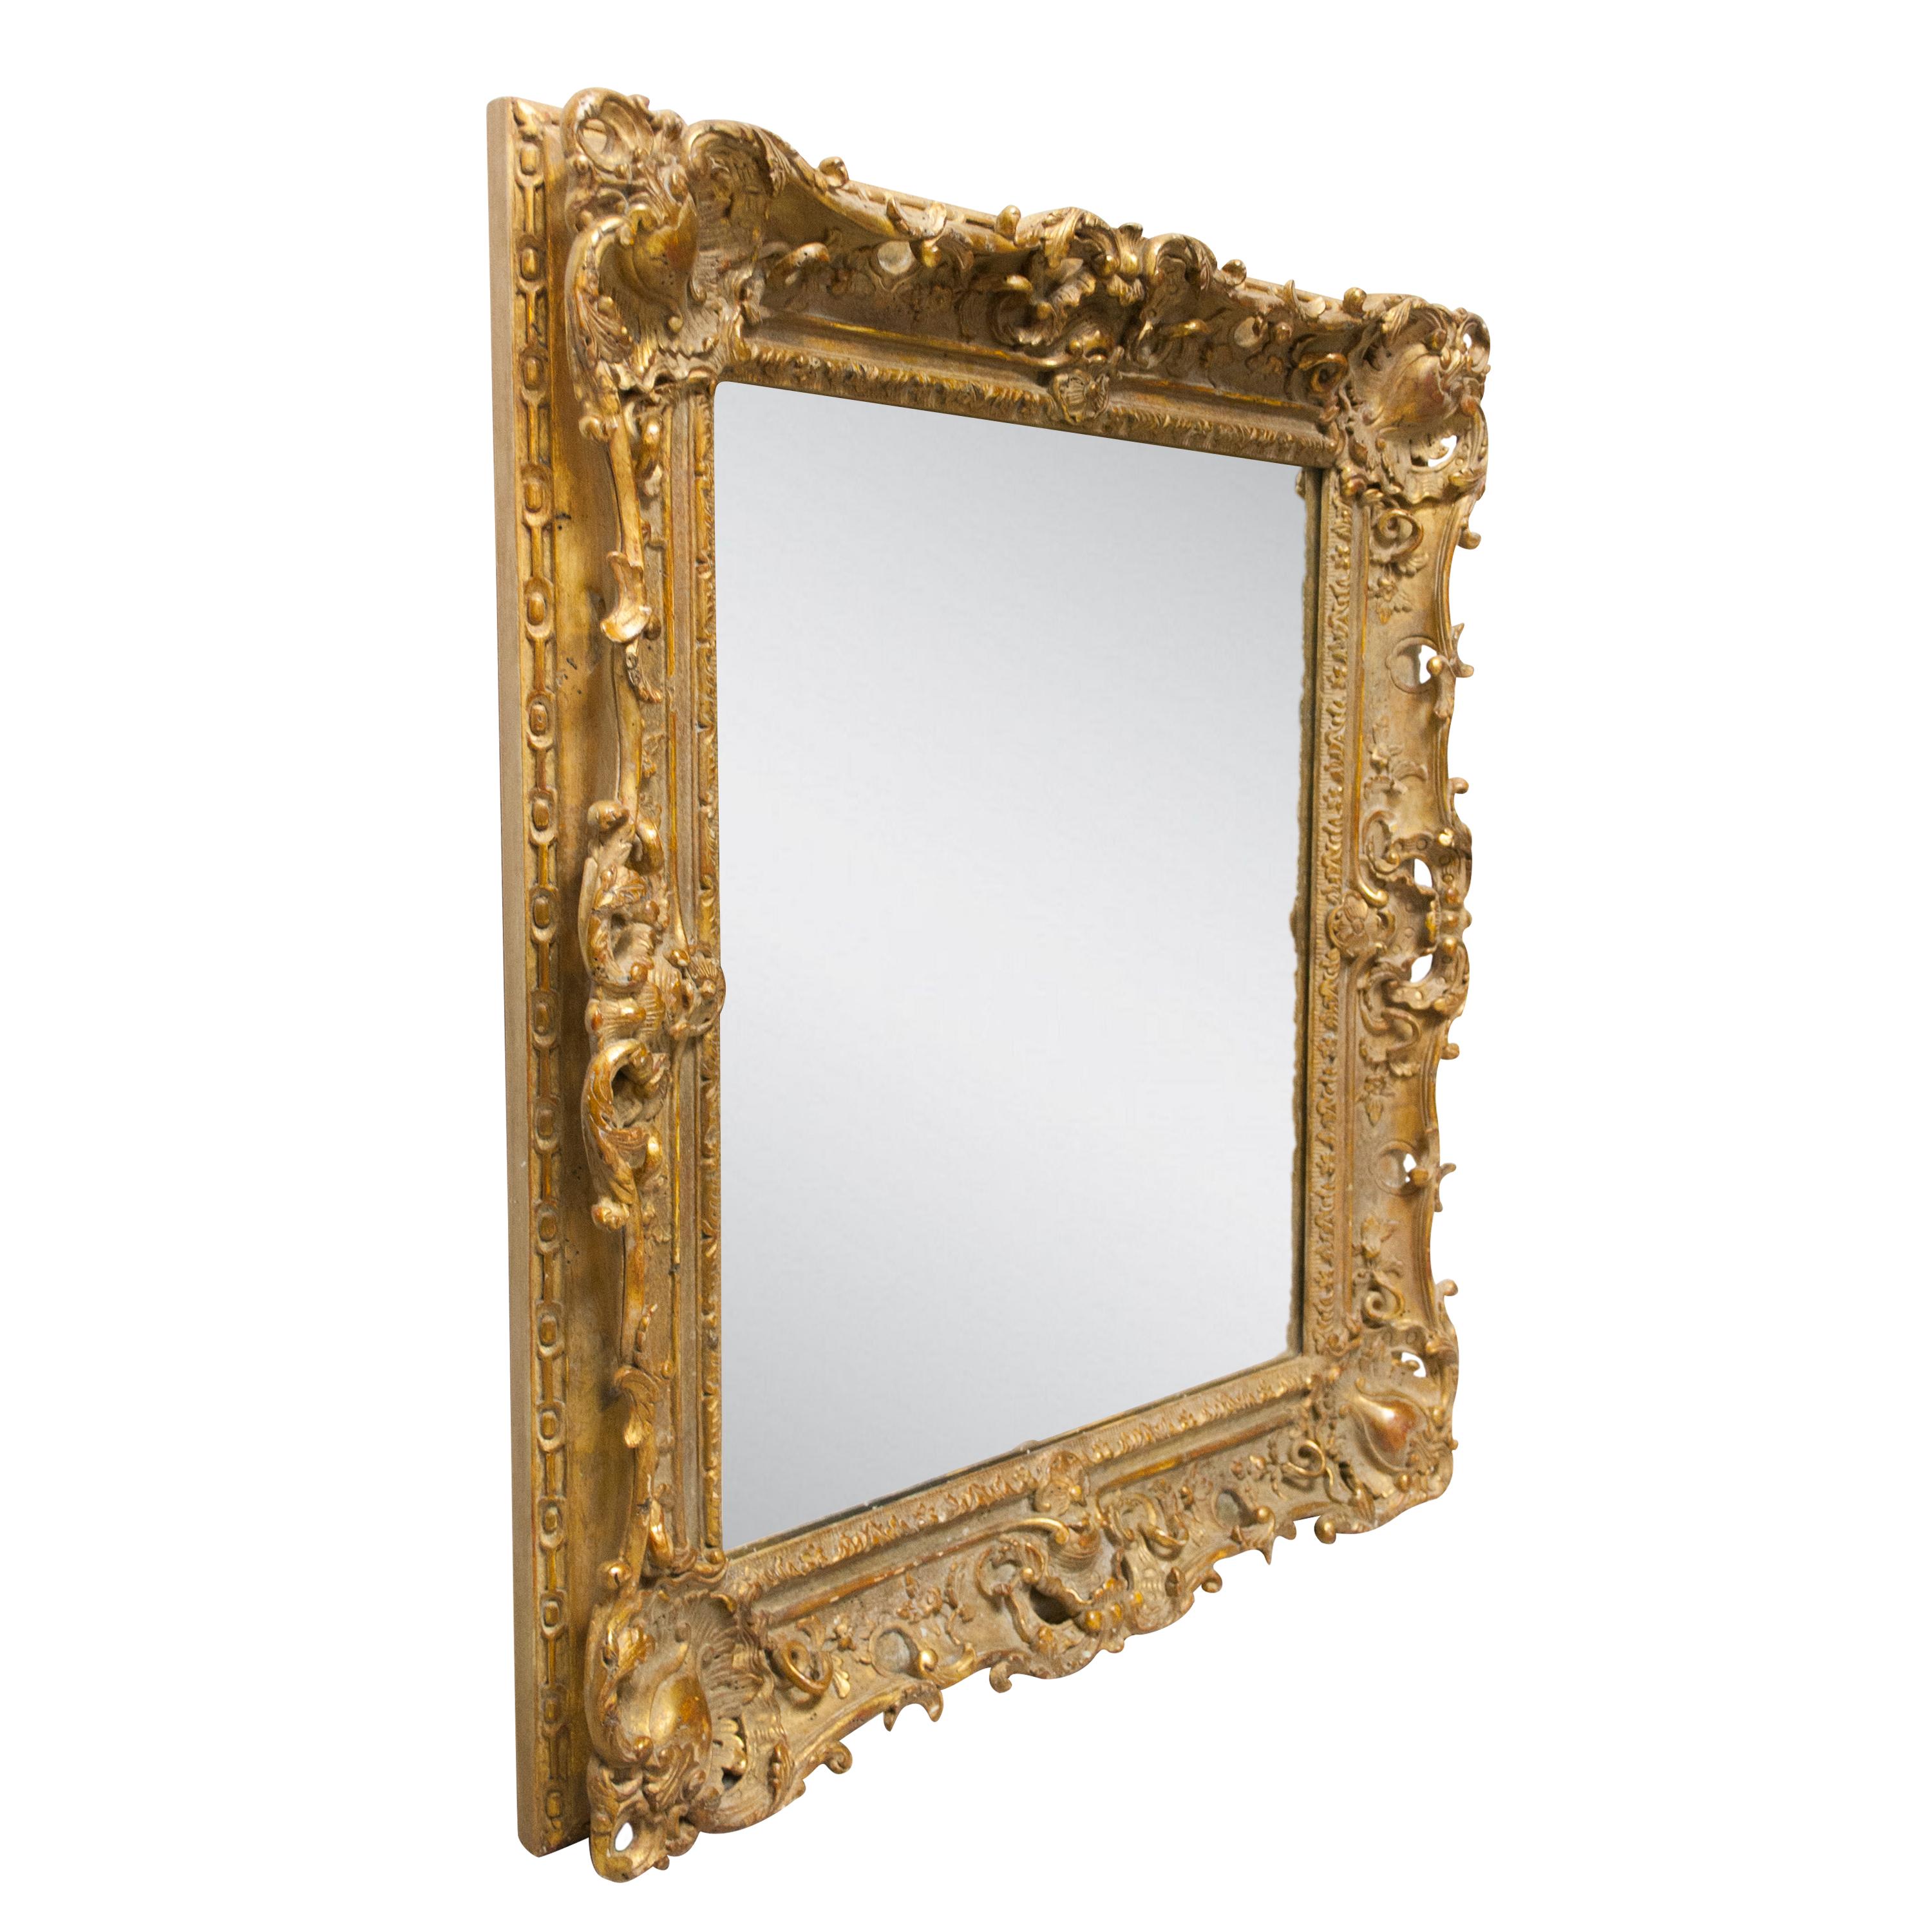 Handcrafted carved Regency Style wood mirror cavered in gold foil.